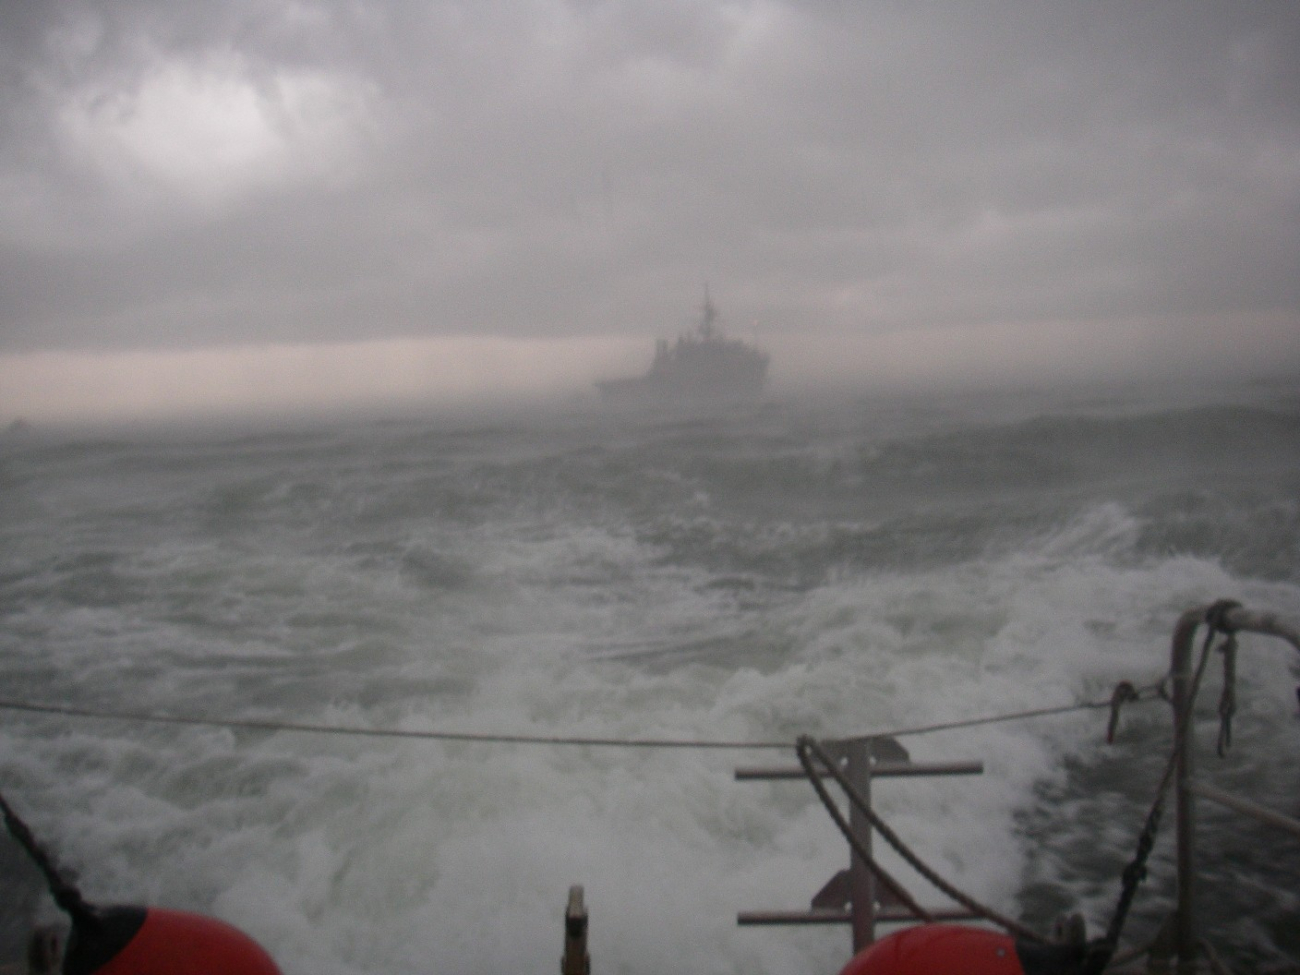 NOAA Ship THOMAS JEFFERSON seen from survey launch at the tail end ofa squall